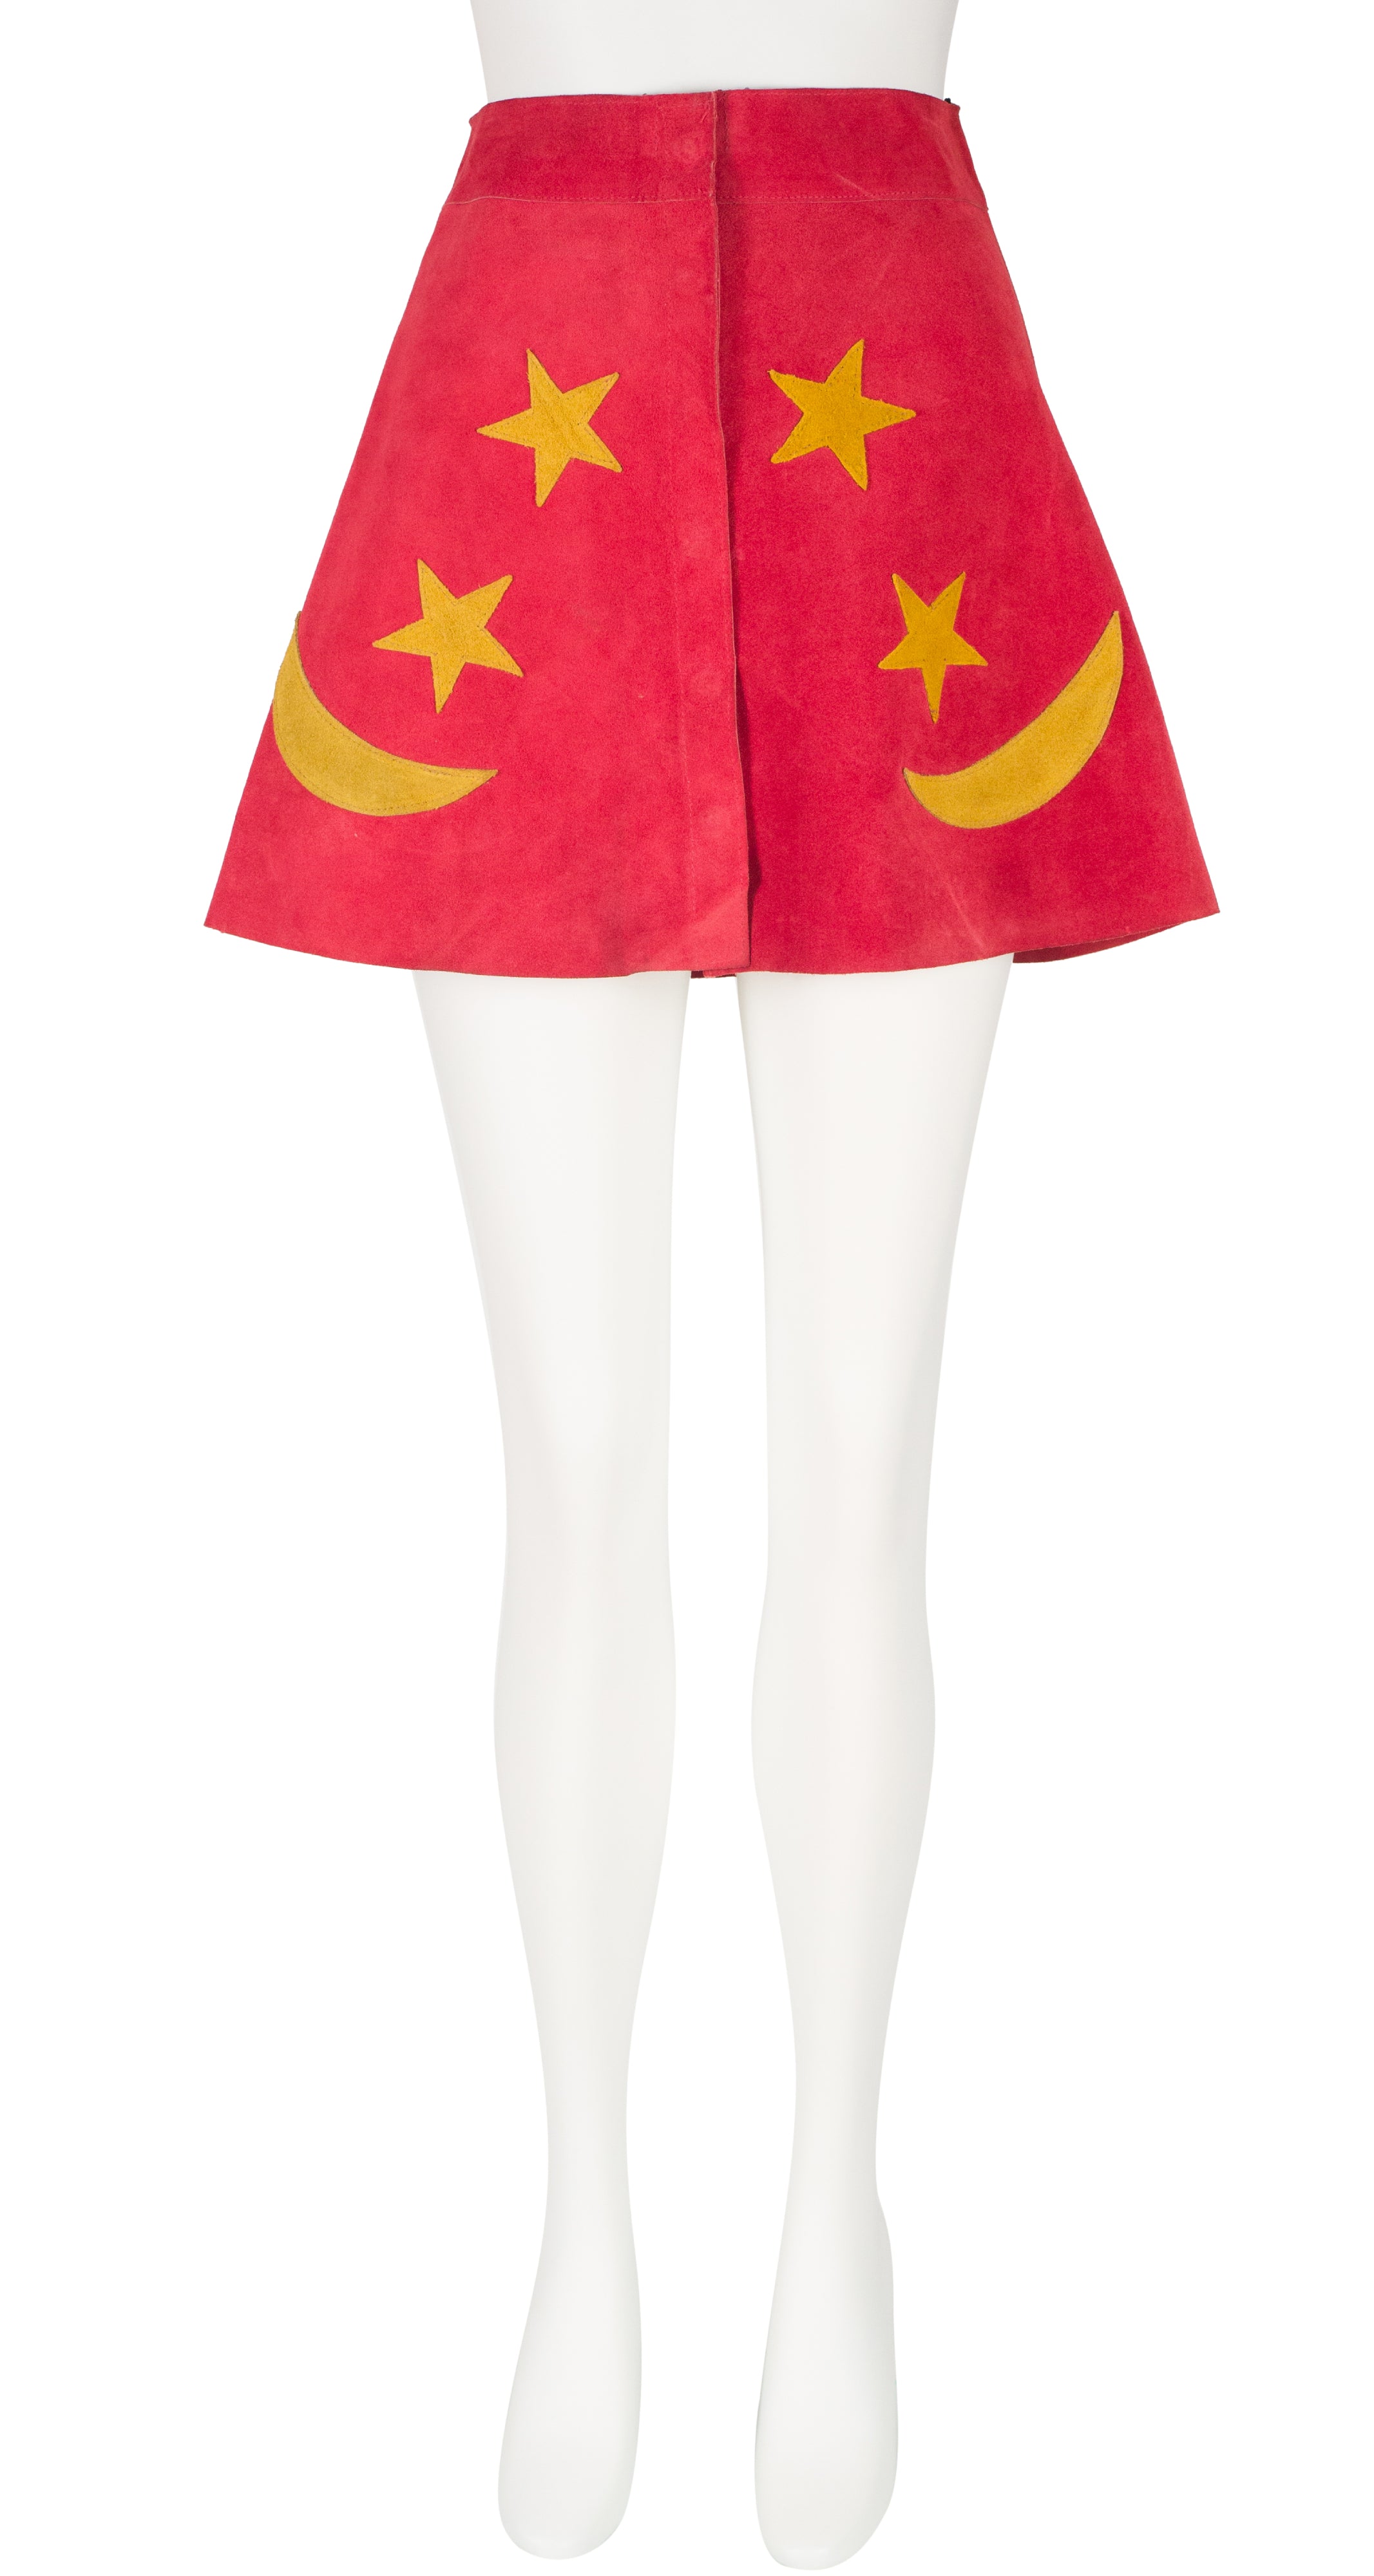 1970s Celestial Red & Yellow Suede Mini Skirt